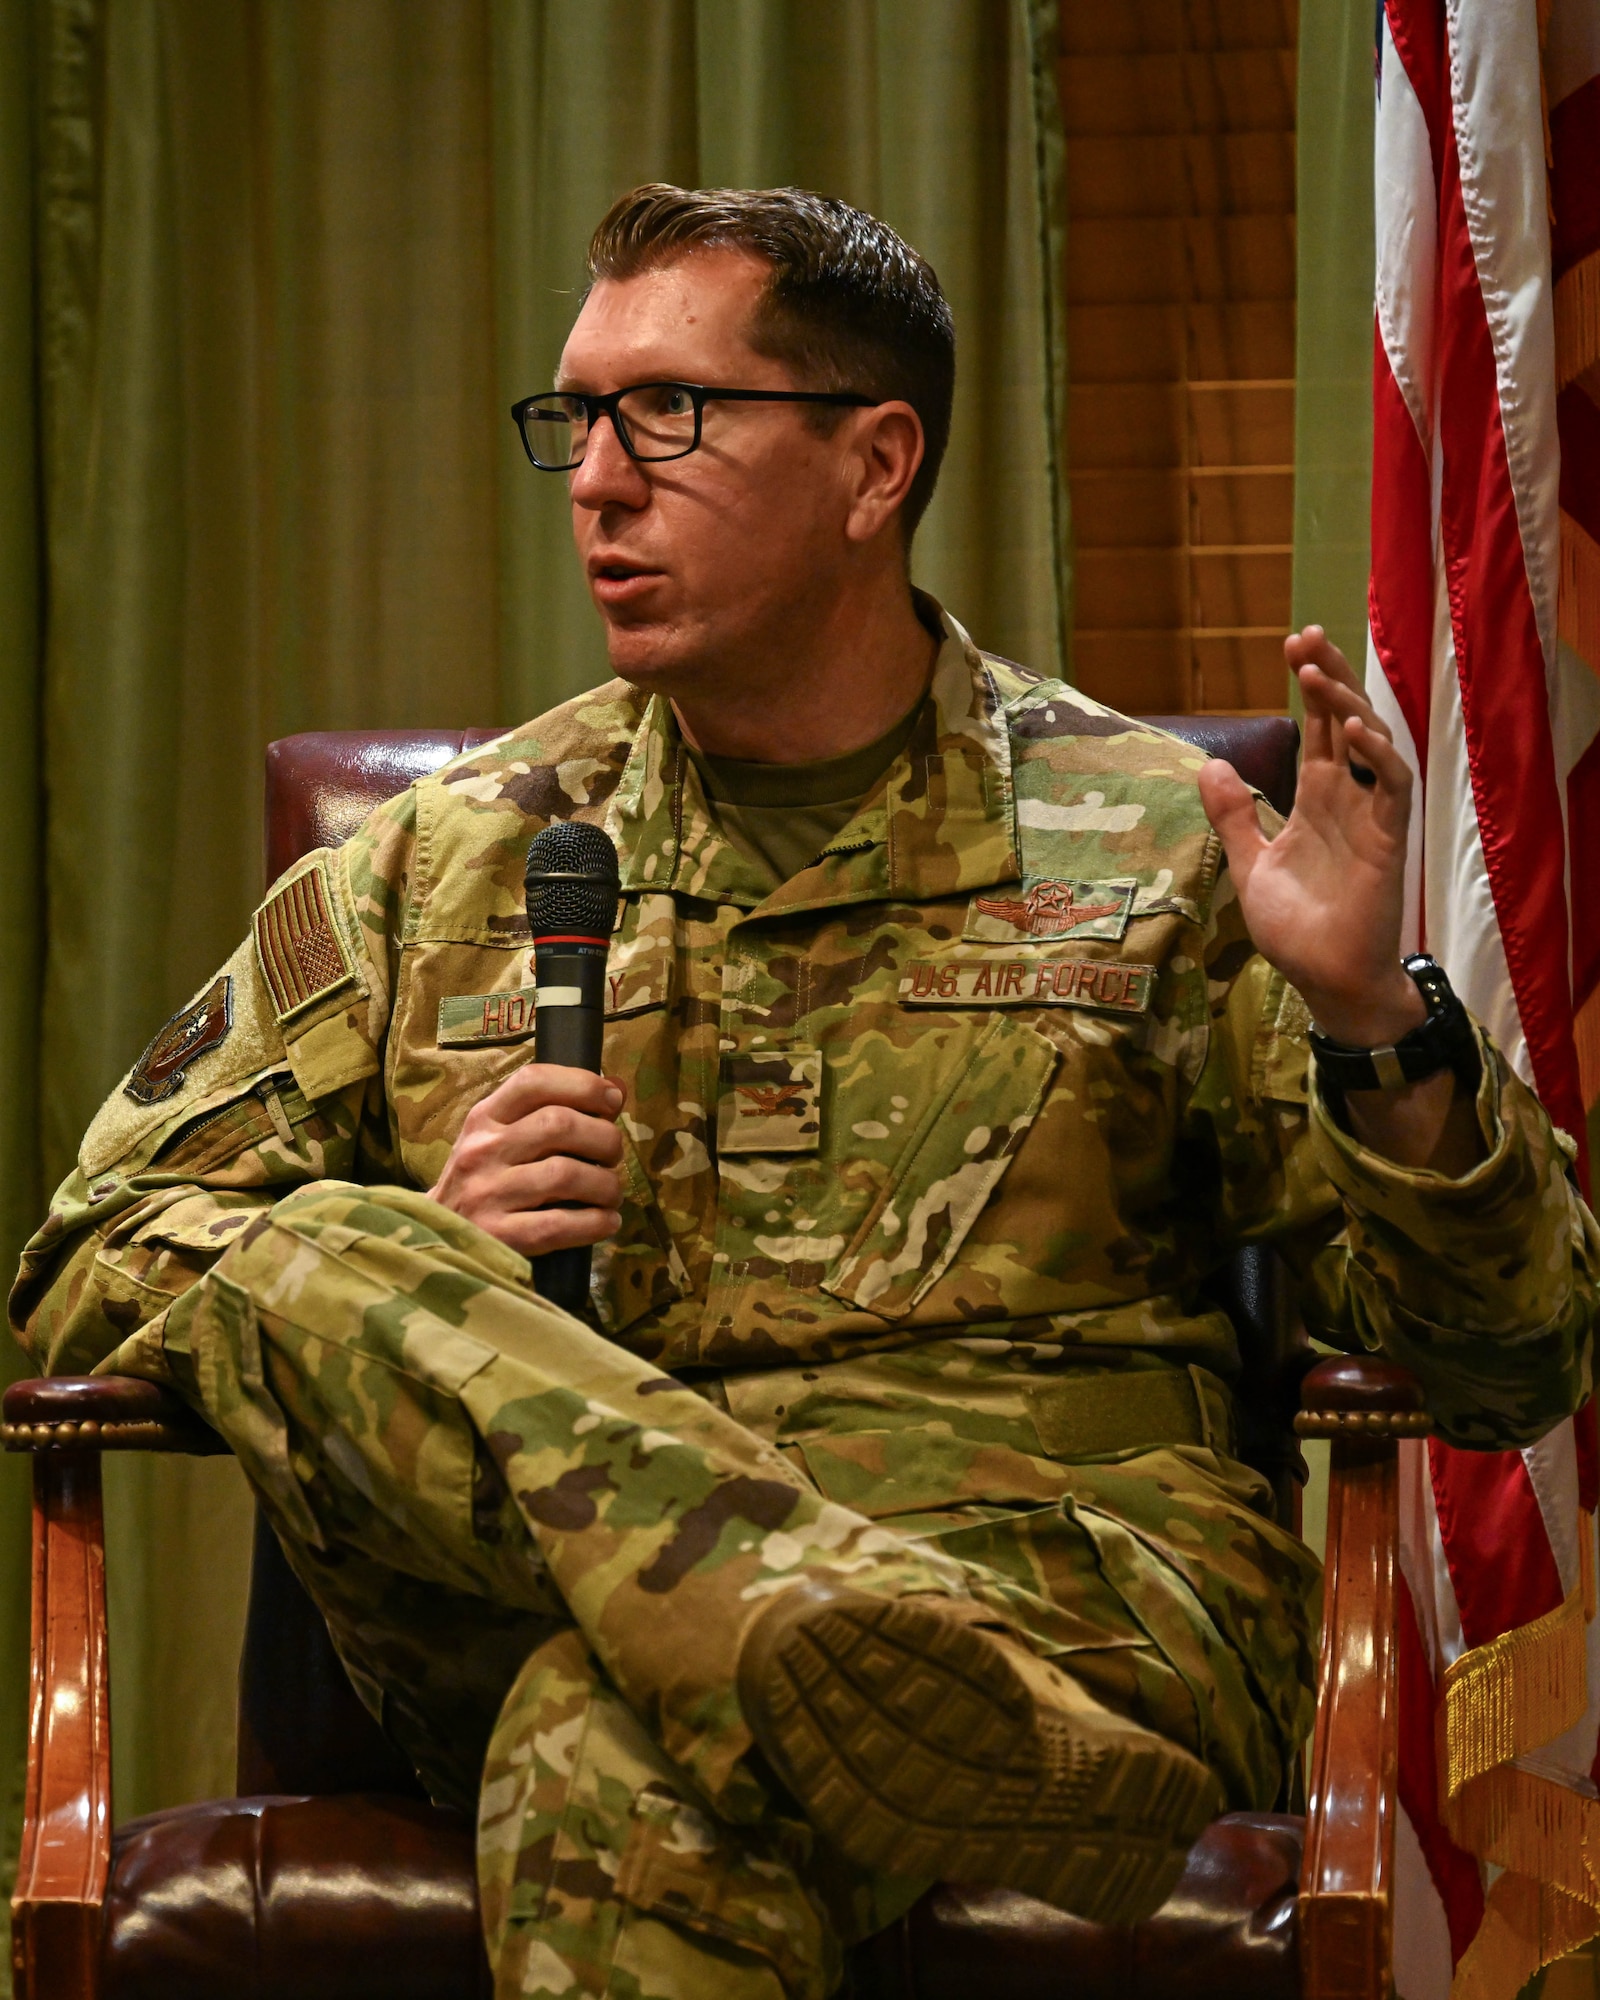 U.S. Air Force Col. Daniel Hoadley, 5th Bomb Wing commander, responds to a question during a town hall meeting at Minot Air Force Base, North Dakota, Nov. 15, 2023. Hoadley engaged with members of the local community during the event and addressed questions they had about Minot AFB. (U.S. Air Force photo by Airman 1st Class Kyle Wilson)